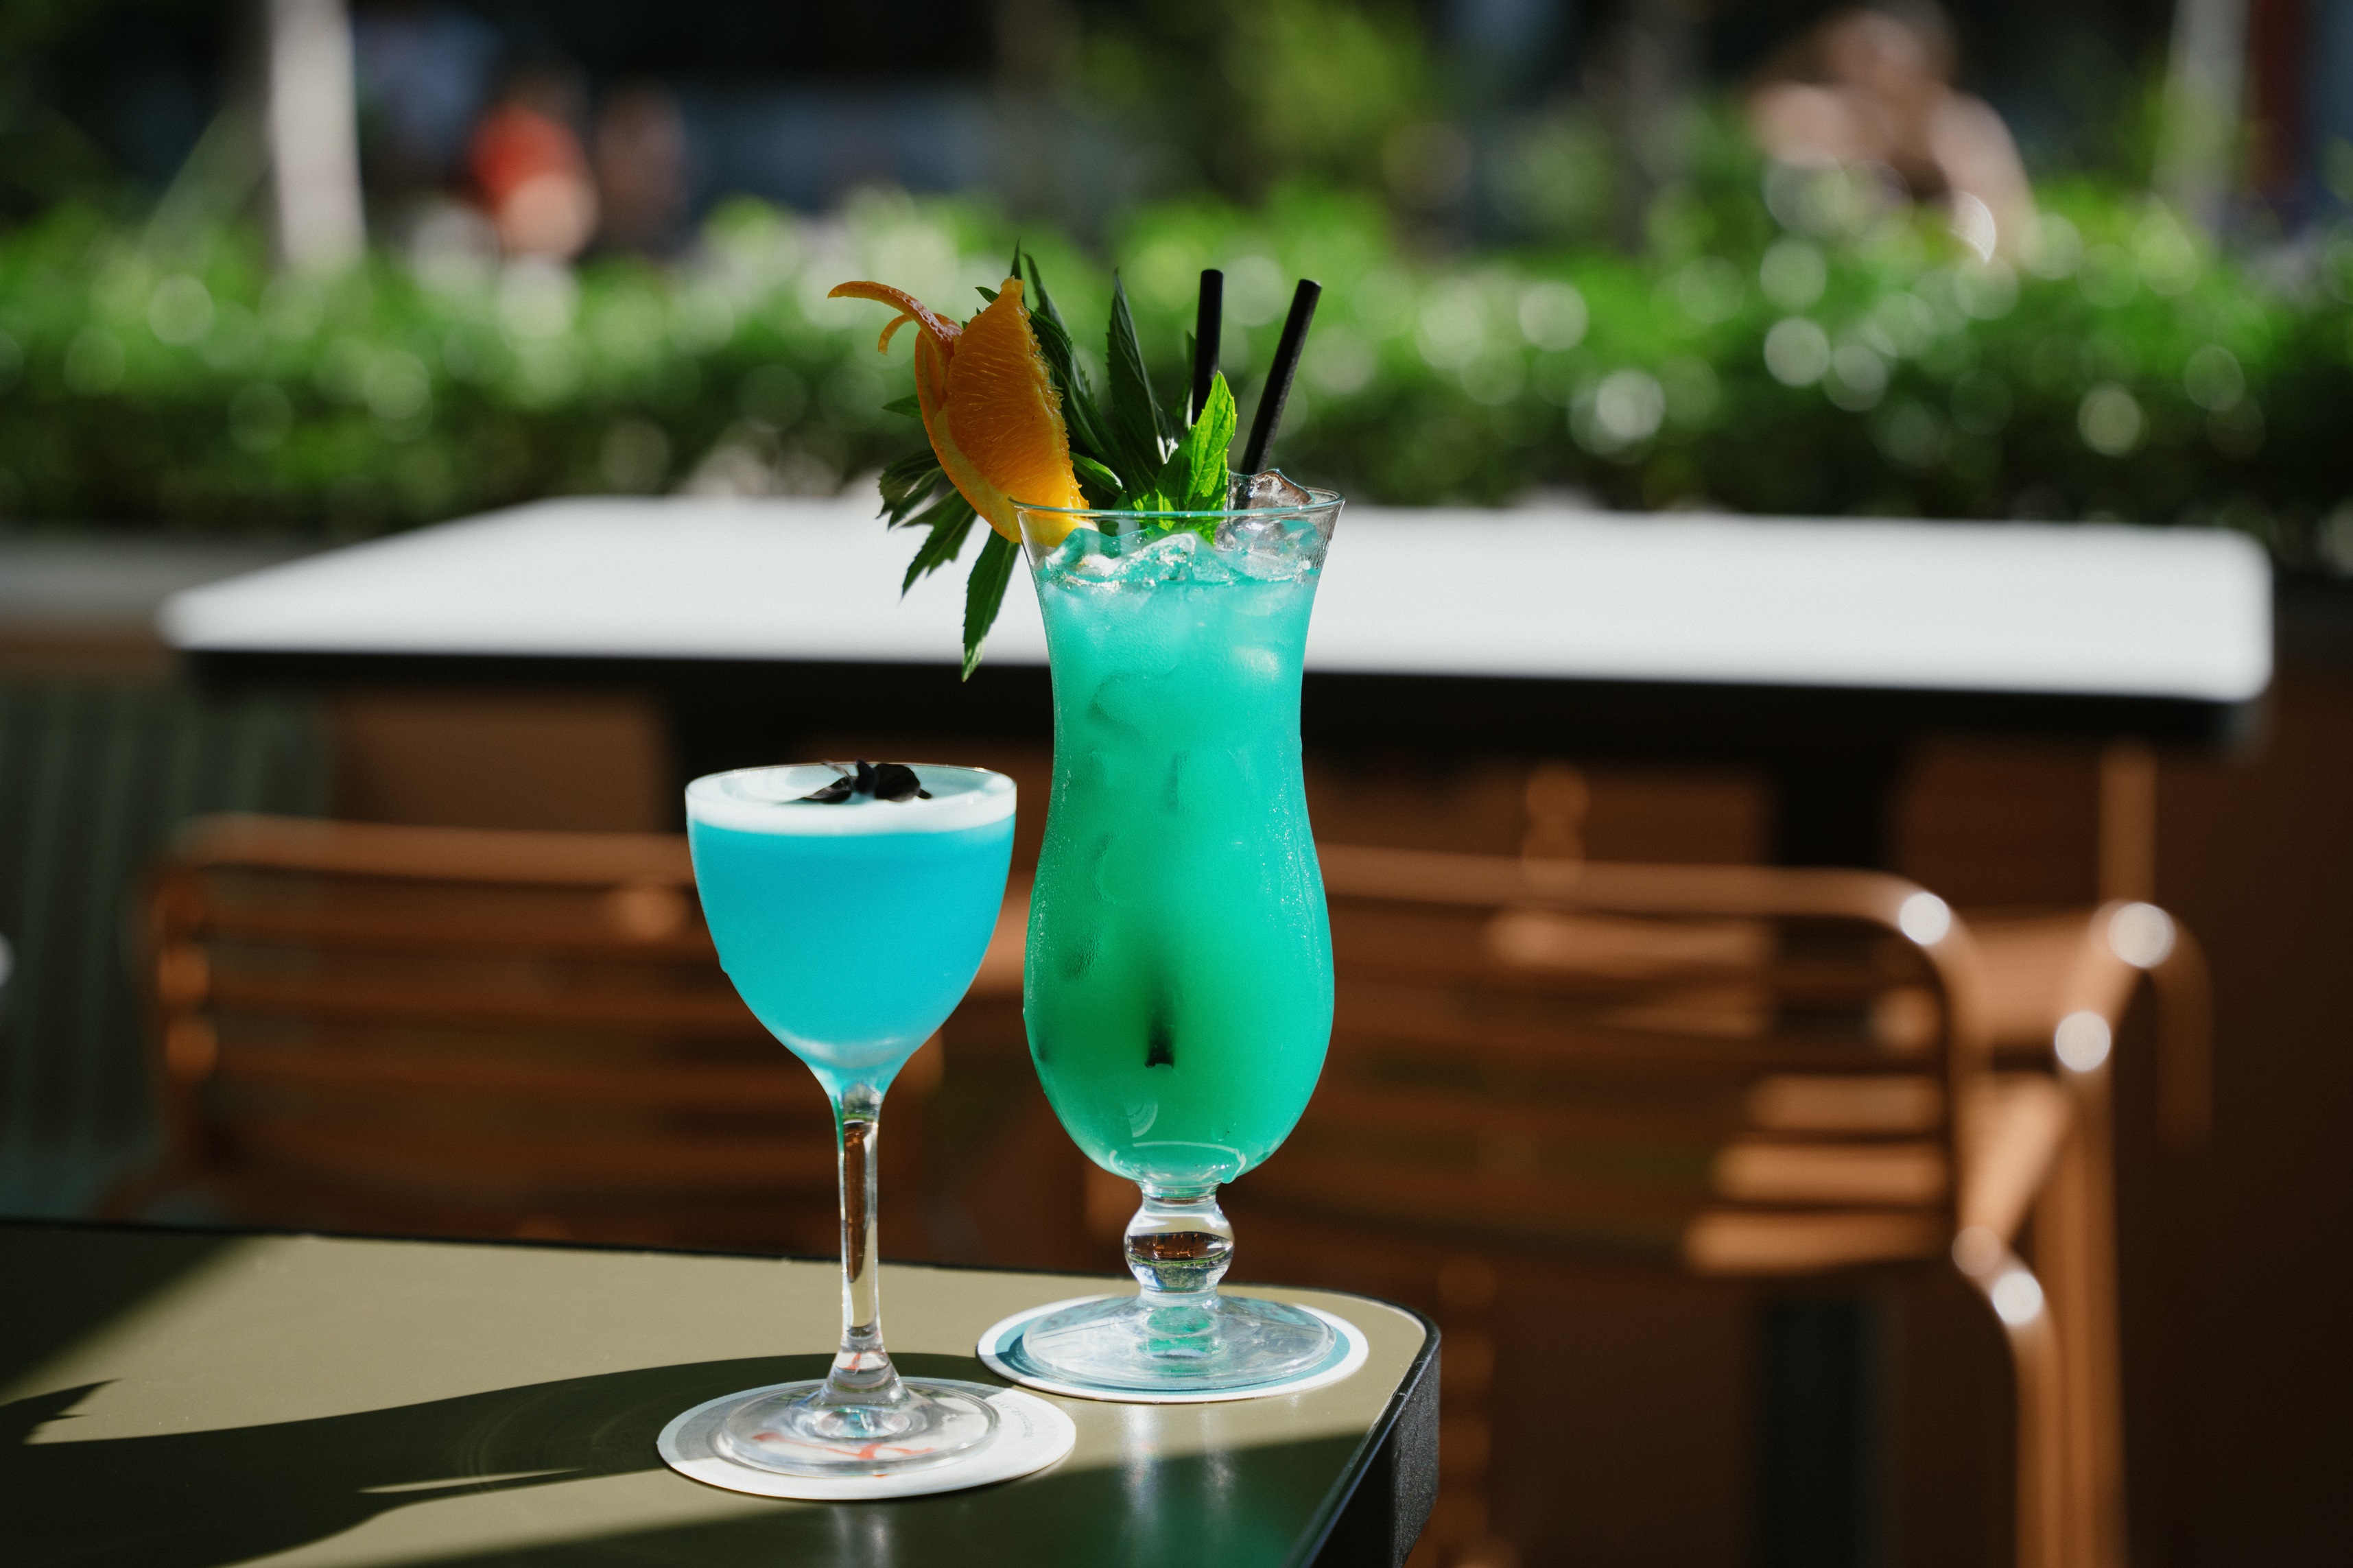 Pumphouse Sydney Unveils Exclusive Cocktail Collaboration with SEA LIFE Sydney Aquarium in Support of Conservation